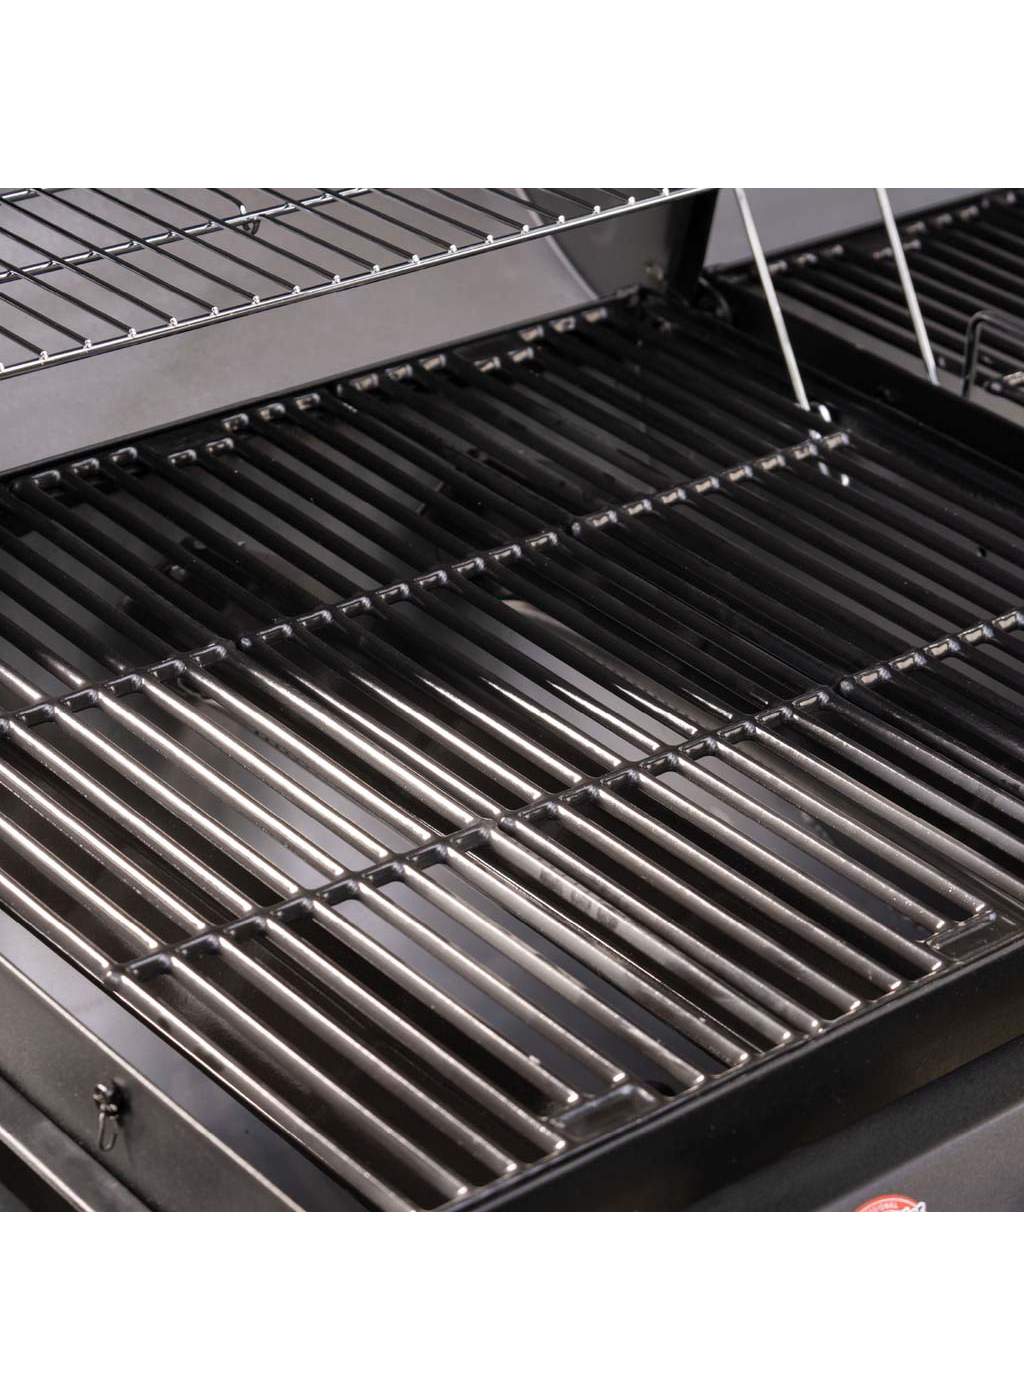 Char-Griller Duo Dual Fuel Grill; image 3 of 3